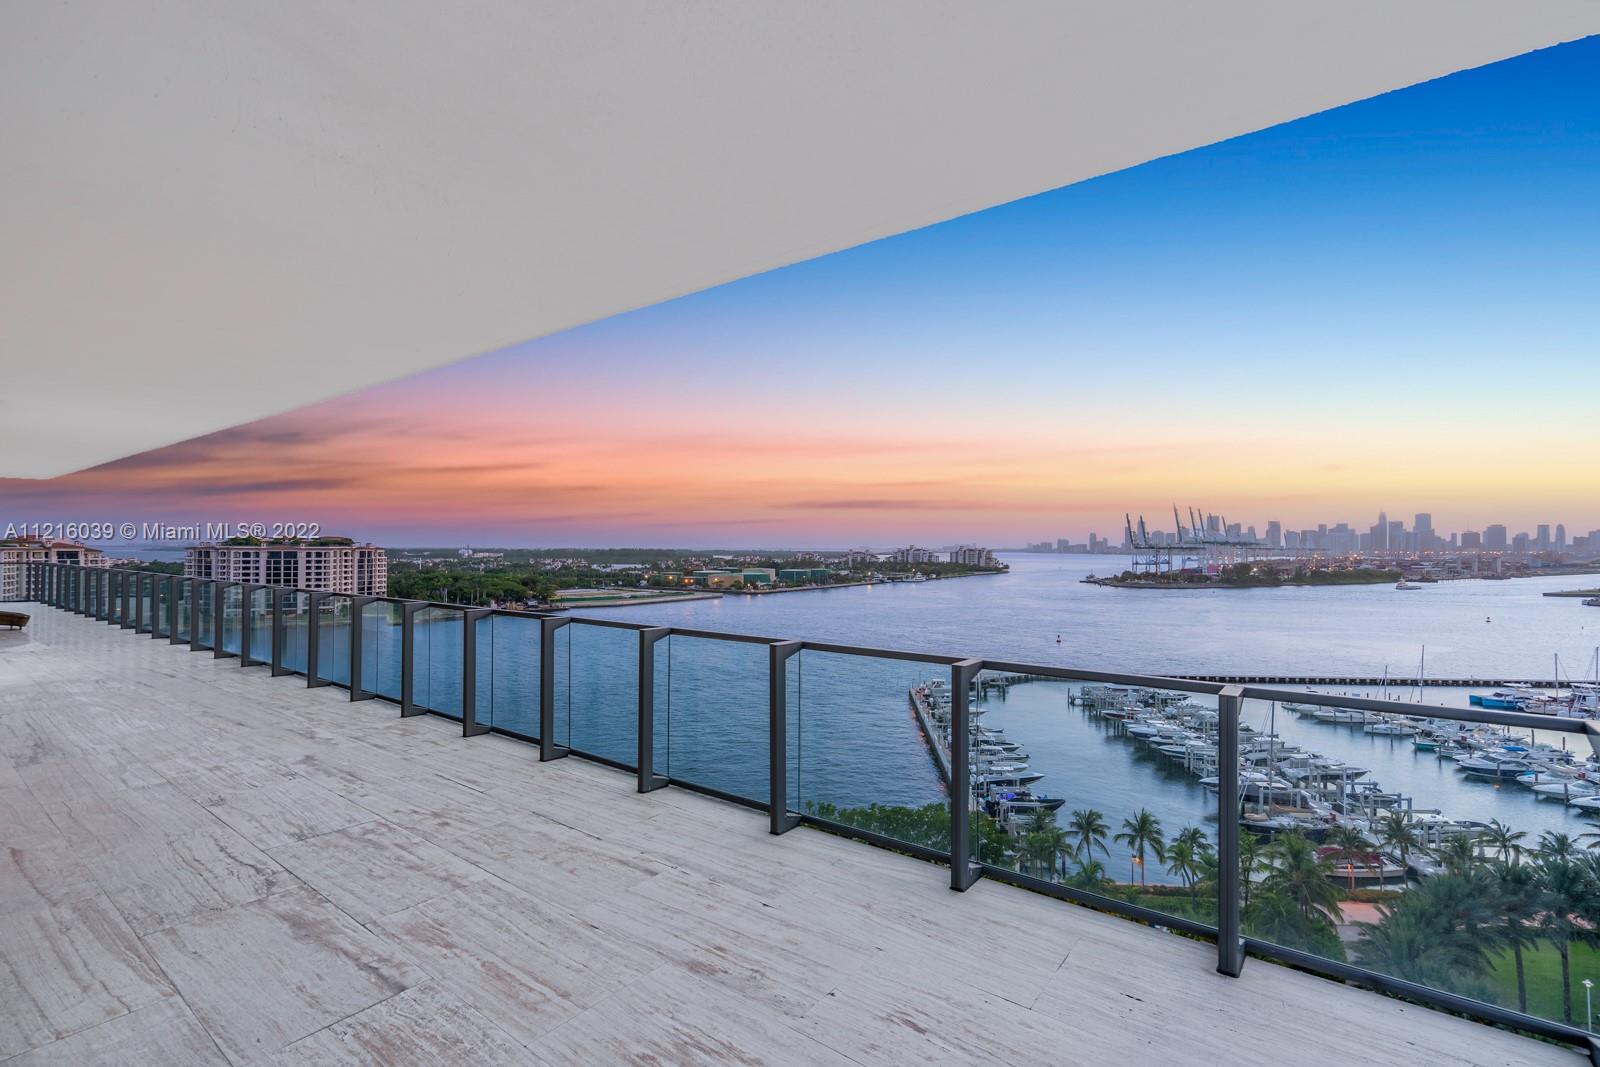 Located at the very southern tip of South Beach, this stunning residence offers exclusivity and privacy. With 4,200 SF of luxurious open plan living space, this 4 BD/3.5 BA comes with the finest of finishes. The kitchen highlights superb craftsmanship to include multiple ovens, gas appliances, sub-zero refrigerator, spacious island. With only 4-units per floor, take in the iconic Miami skyline and flow-through simultaneous views of the ocean and the city from your own 11-feet deep wrap-around balcony. Enjoy other state-of-the-art amenities like floor-to-ceiling impact and sound resistant windows crafted from a special &quot;pure and clear&quot; glass, beautiful marble flooring, and more! Infinity pool area and private 2-car air-conditioned garage included.